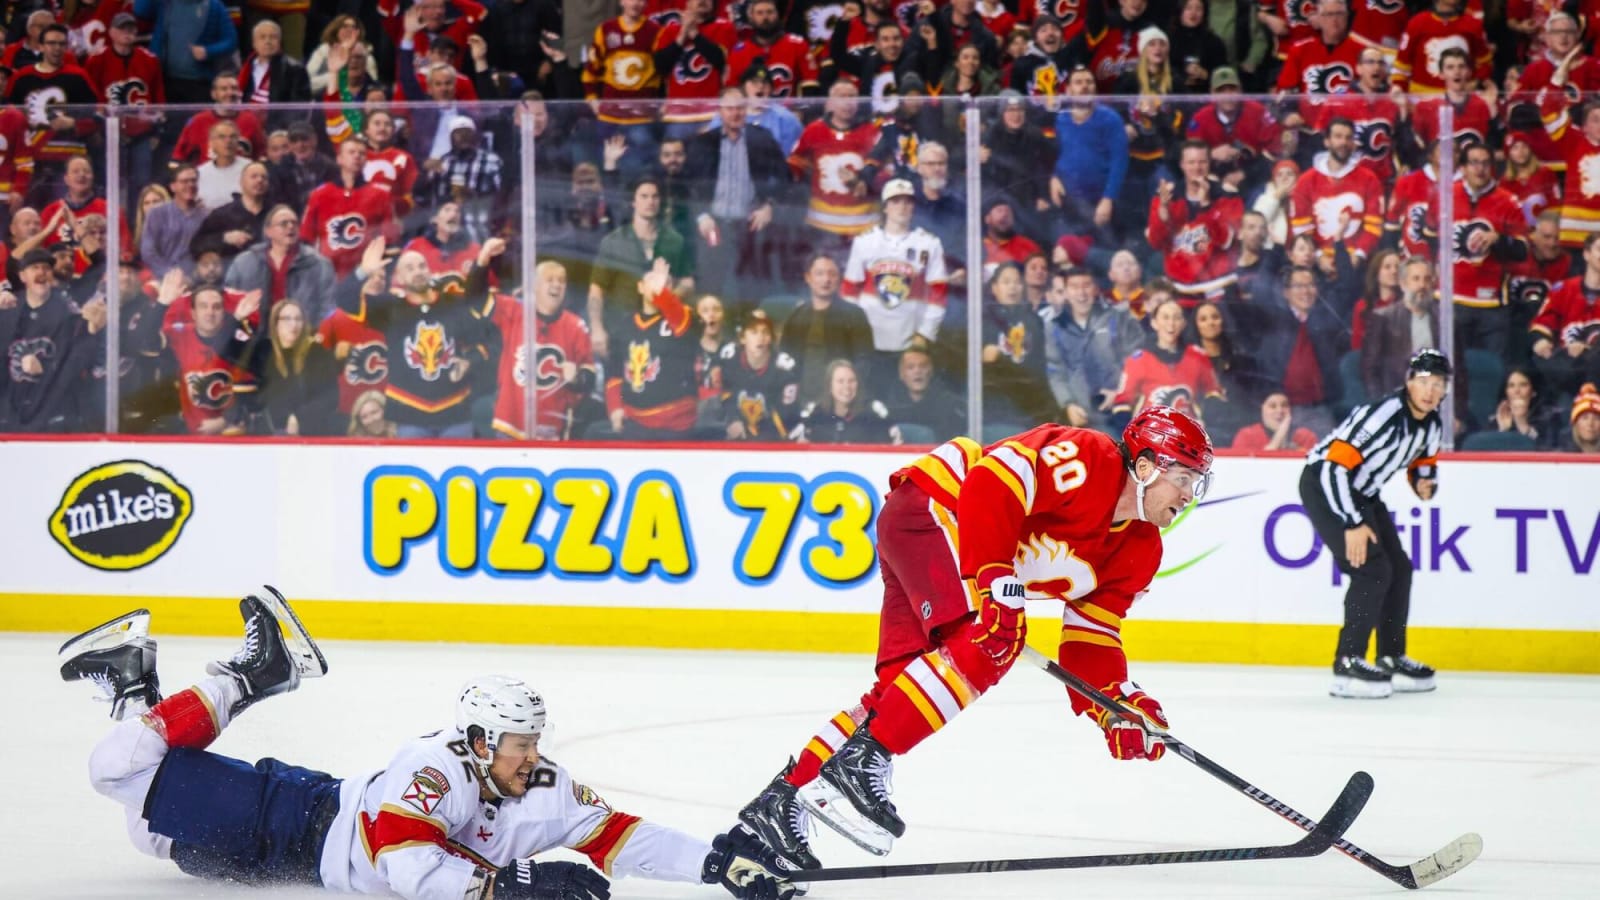 Despite no playoffs, there’s still a lot for the Calgary Flames to play for in Game 82